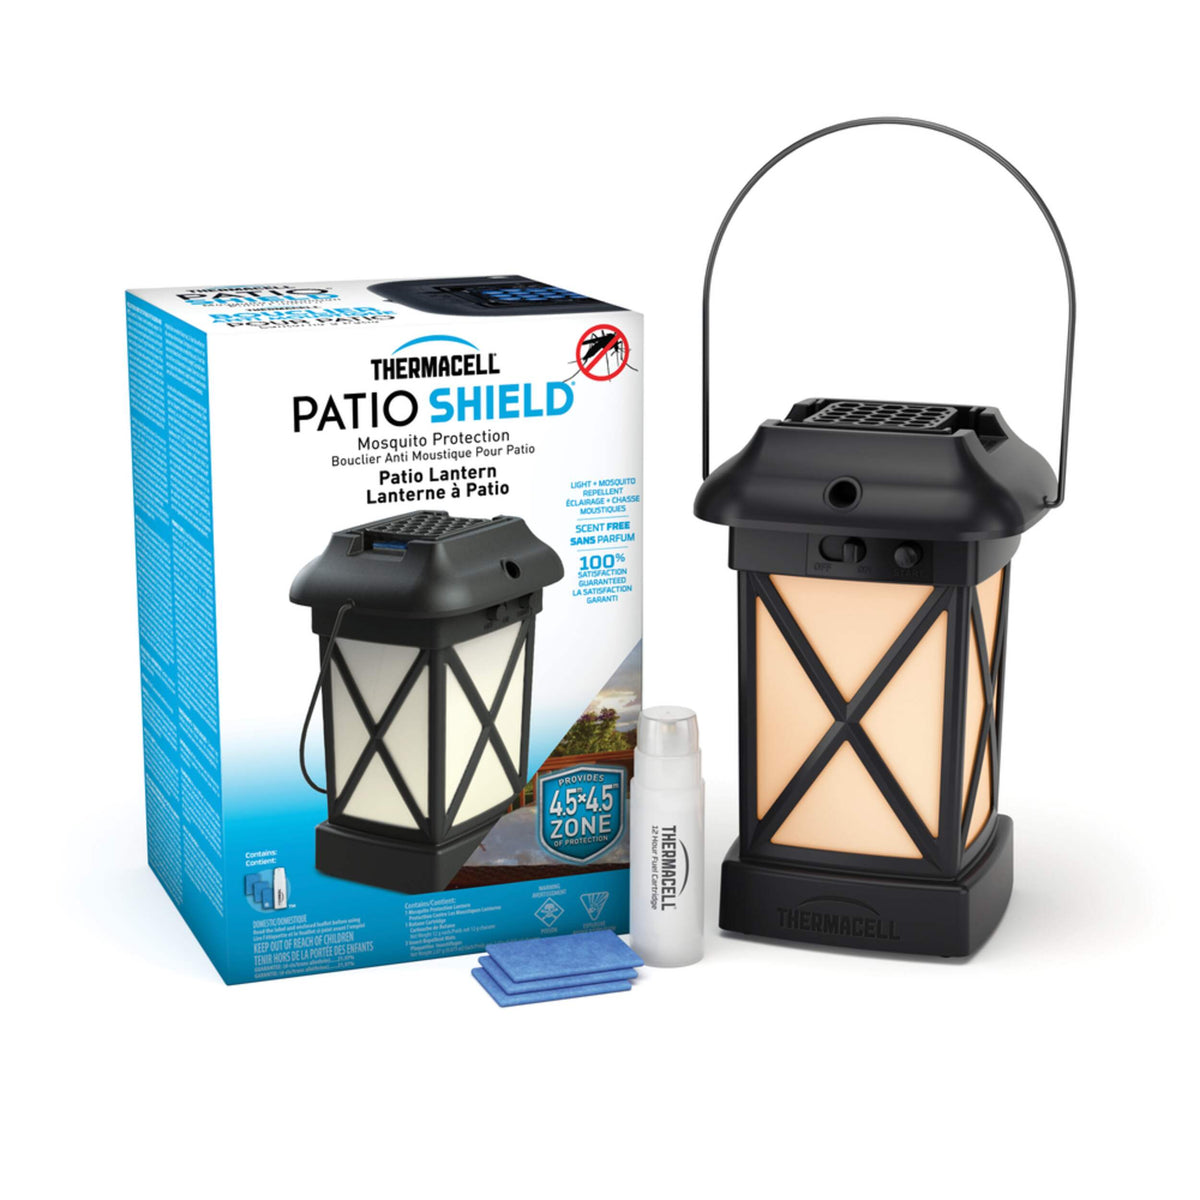 Thermacell Mosquito Repellent, Patio Shield Lantern